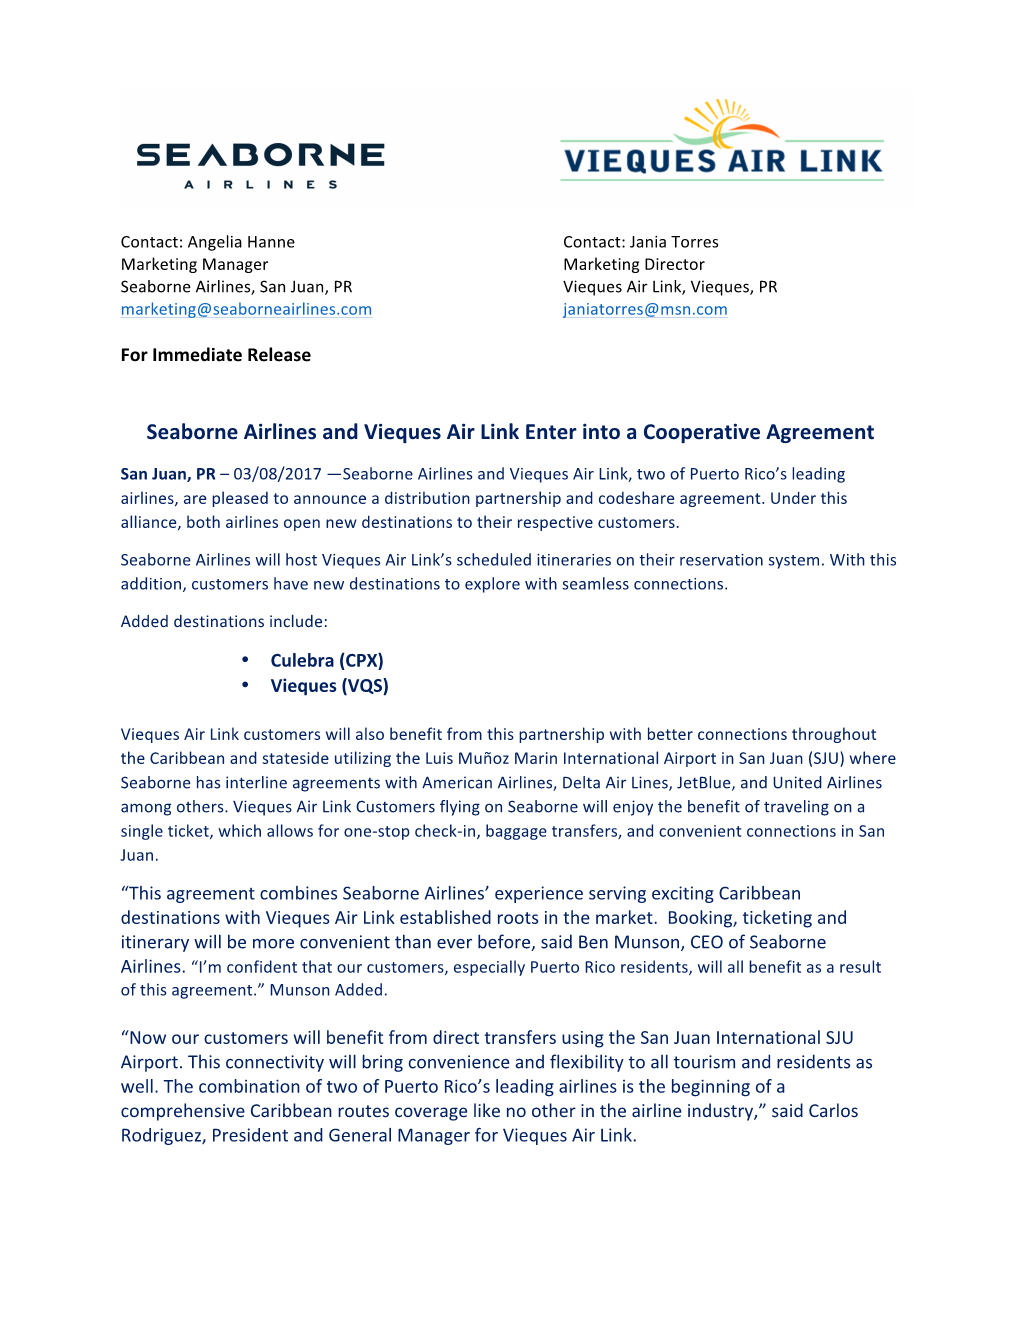 Seaborne Airlines and Vieques Air Link Enter Into a Cooperative Agreement